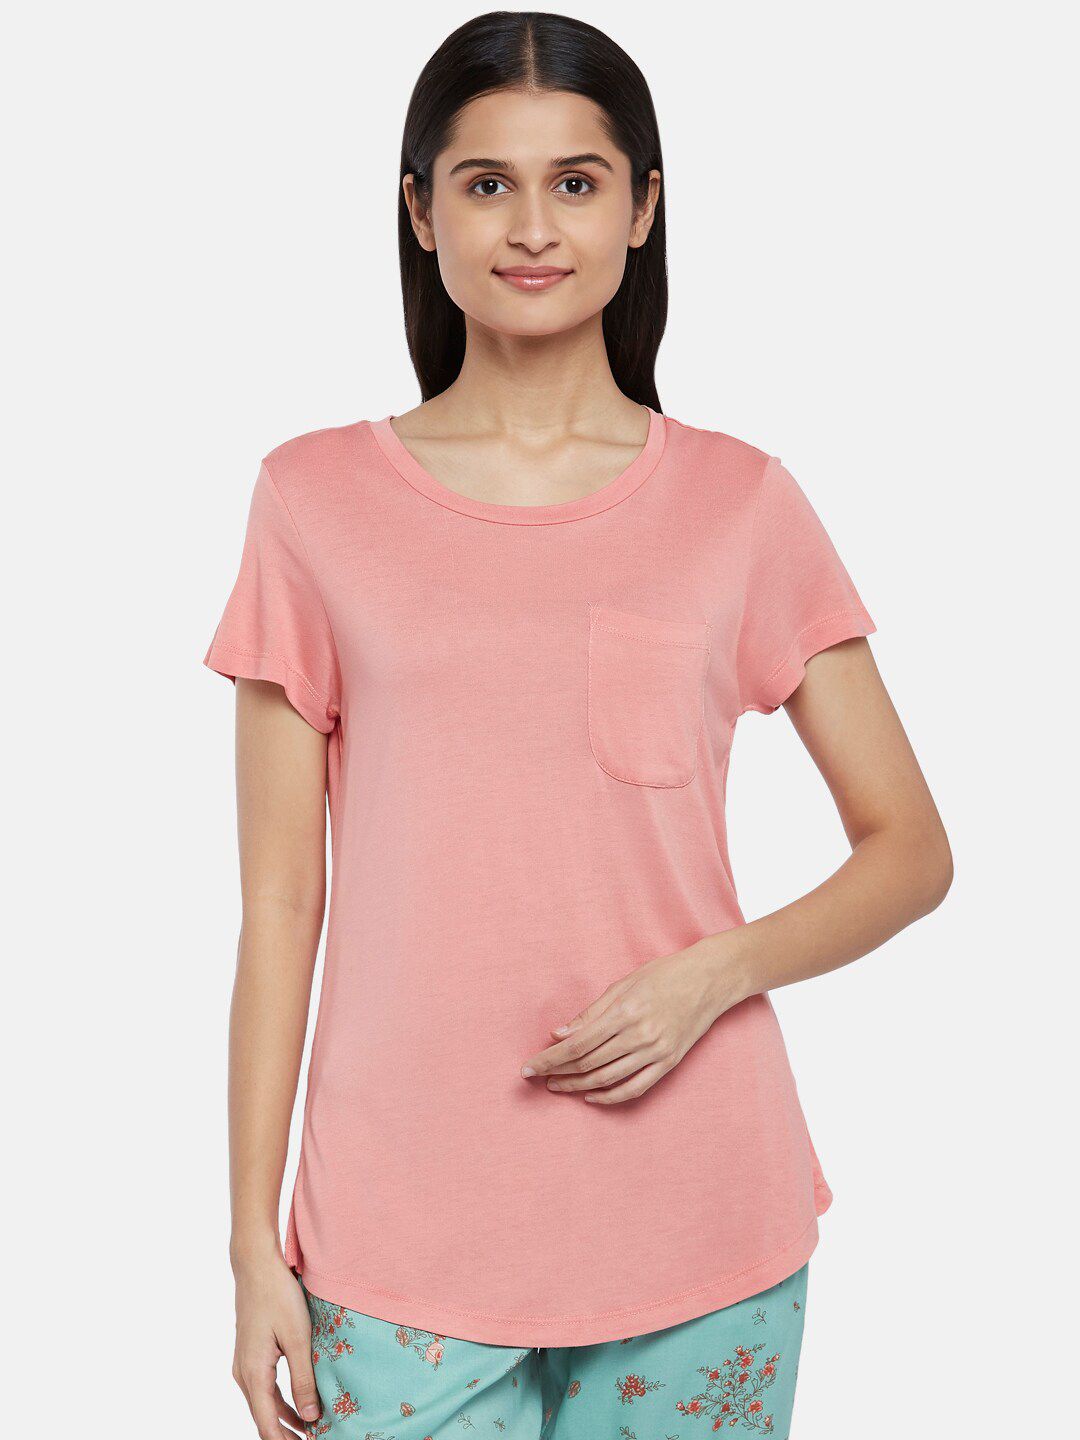 Dreamz by Pantaloons Pink Solid Lounge tshirt Price in India